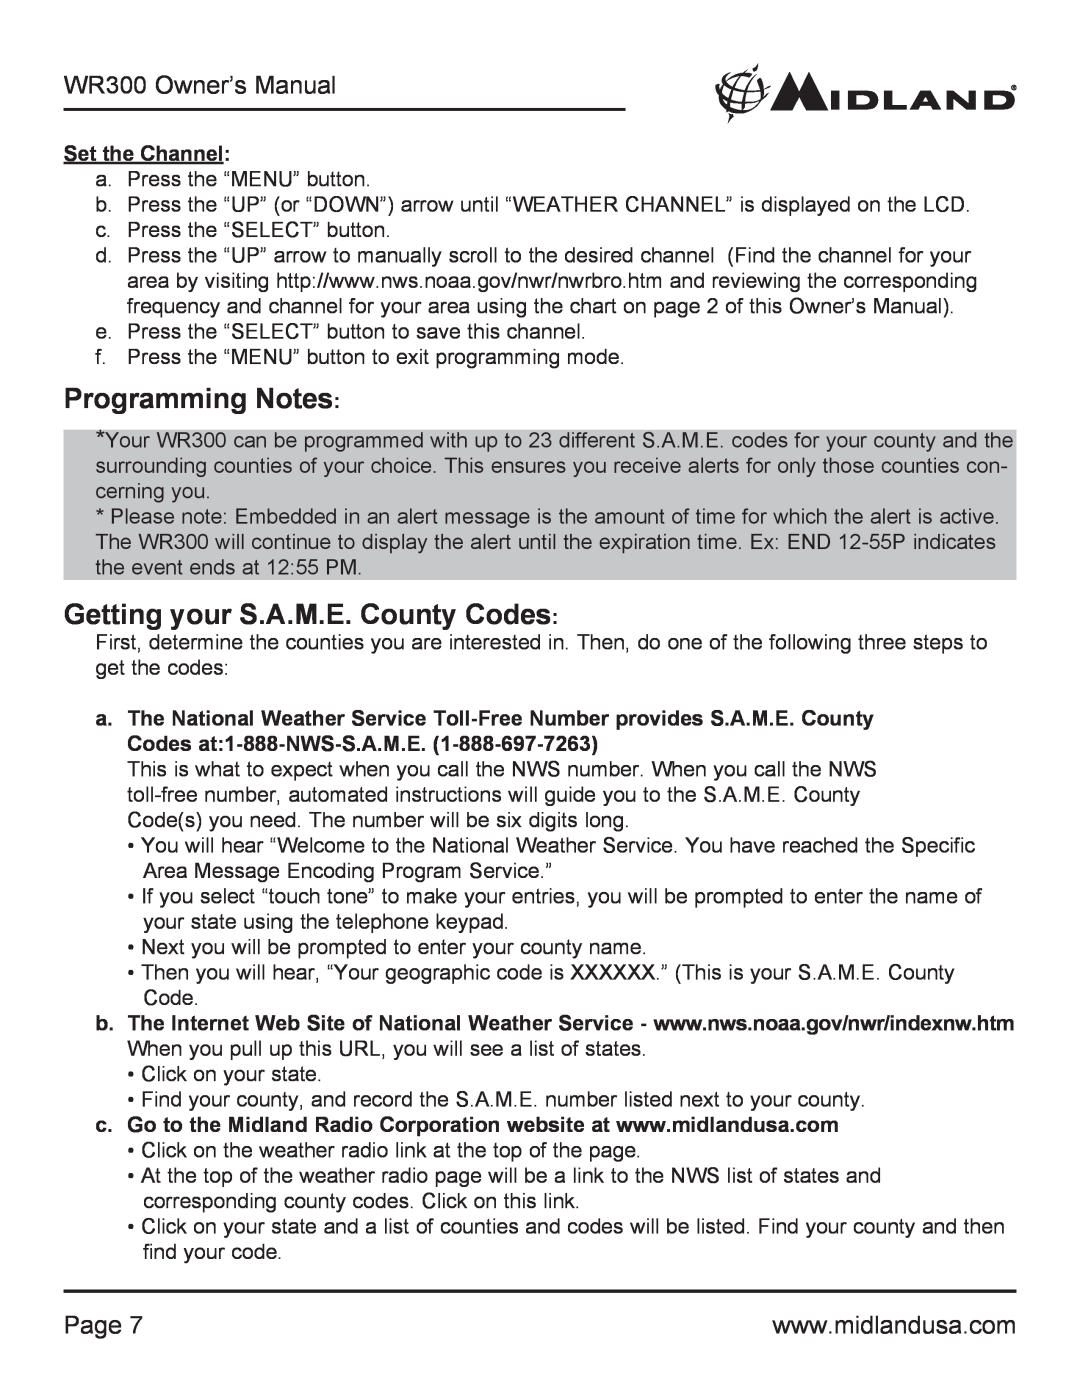 Midland Radio WR300 owner manual Programming Notes, Getting your S.A.M.E. County Codes, Page 